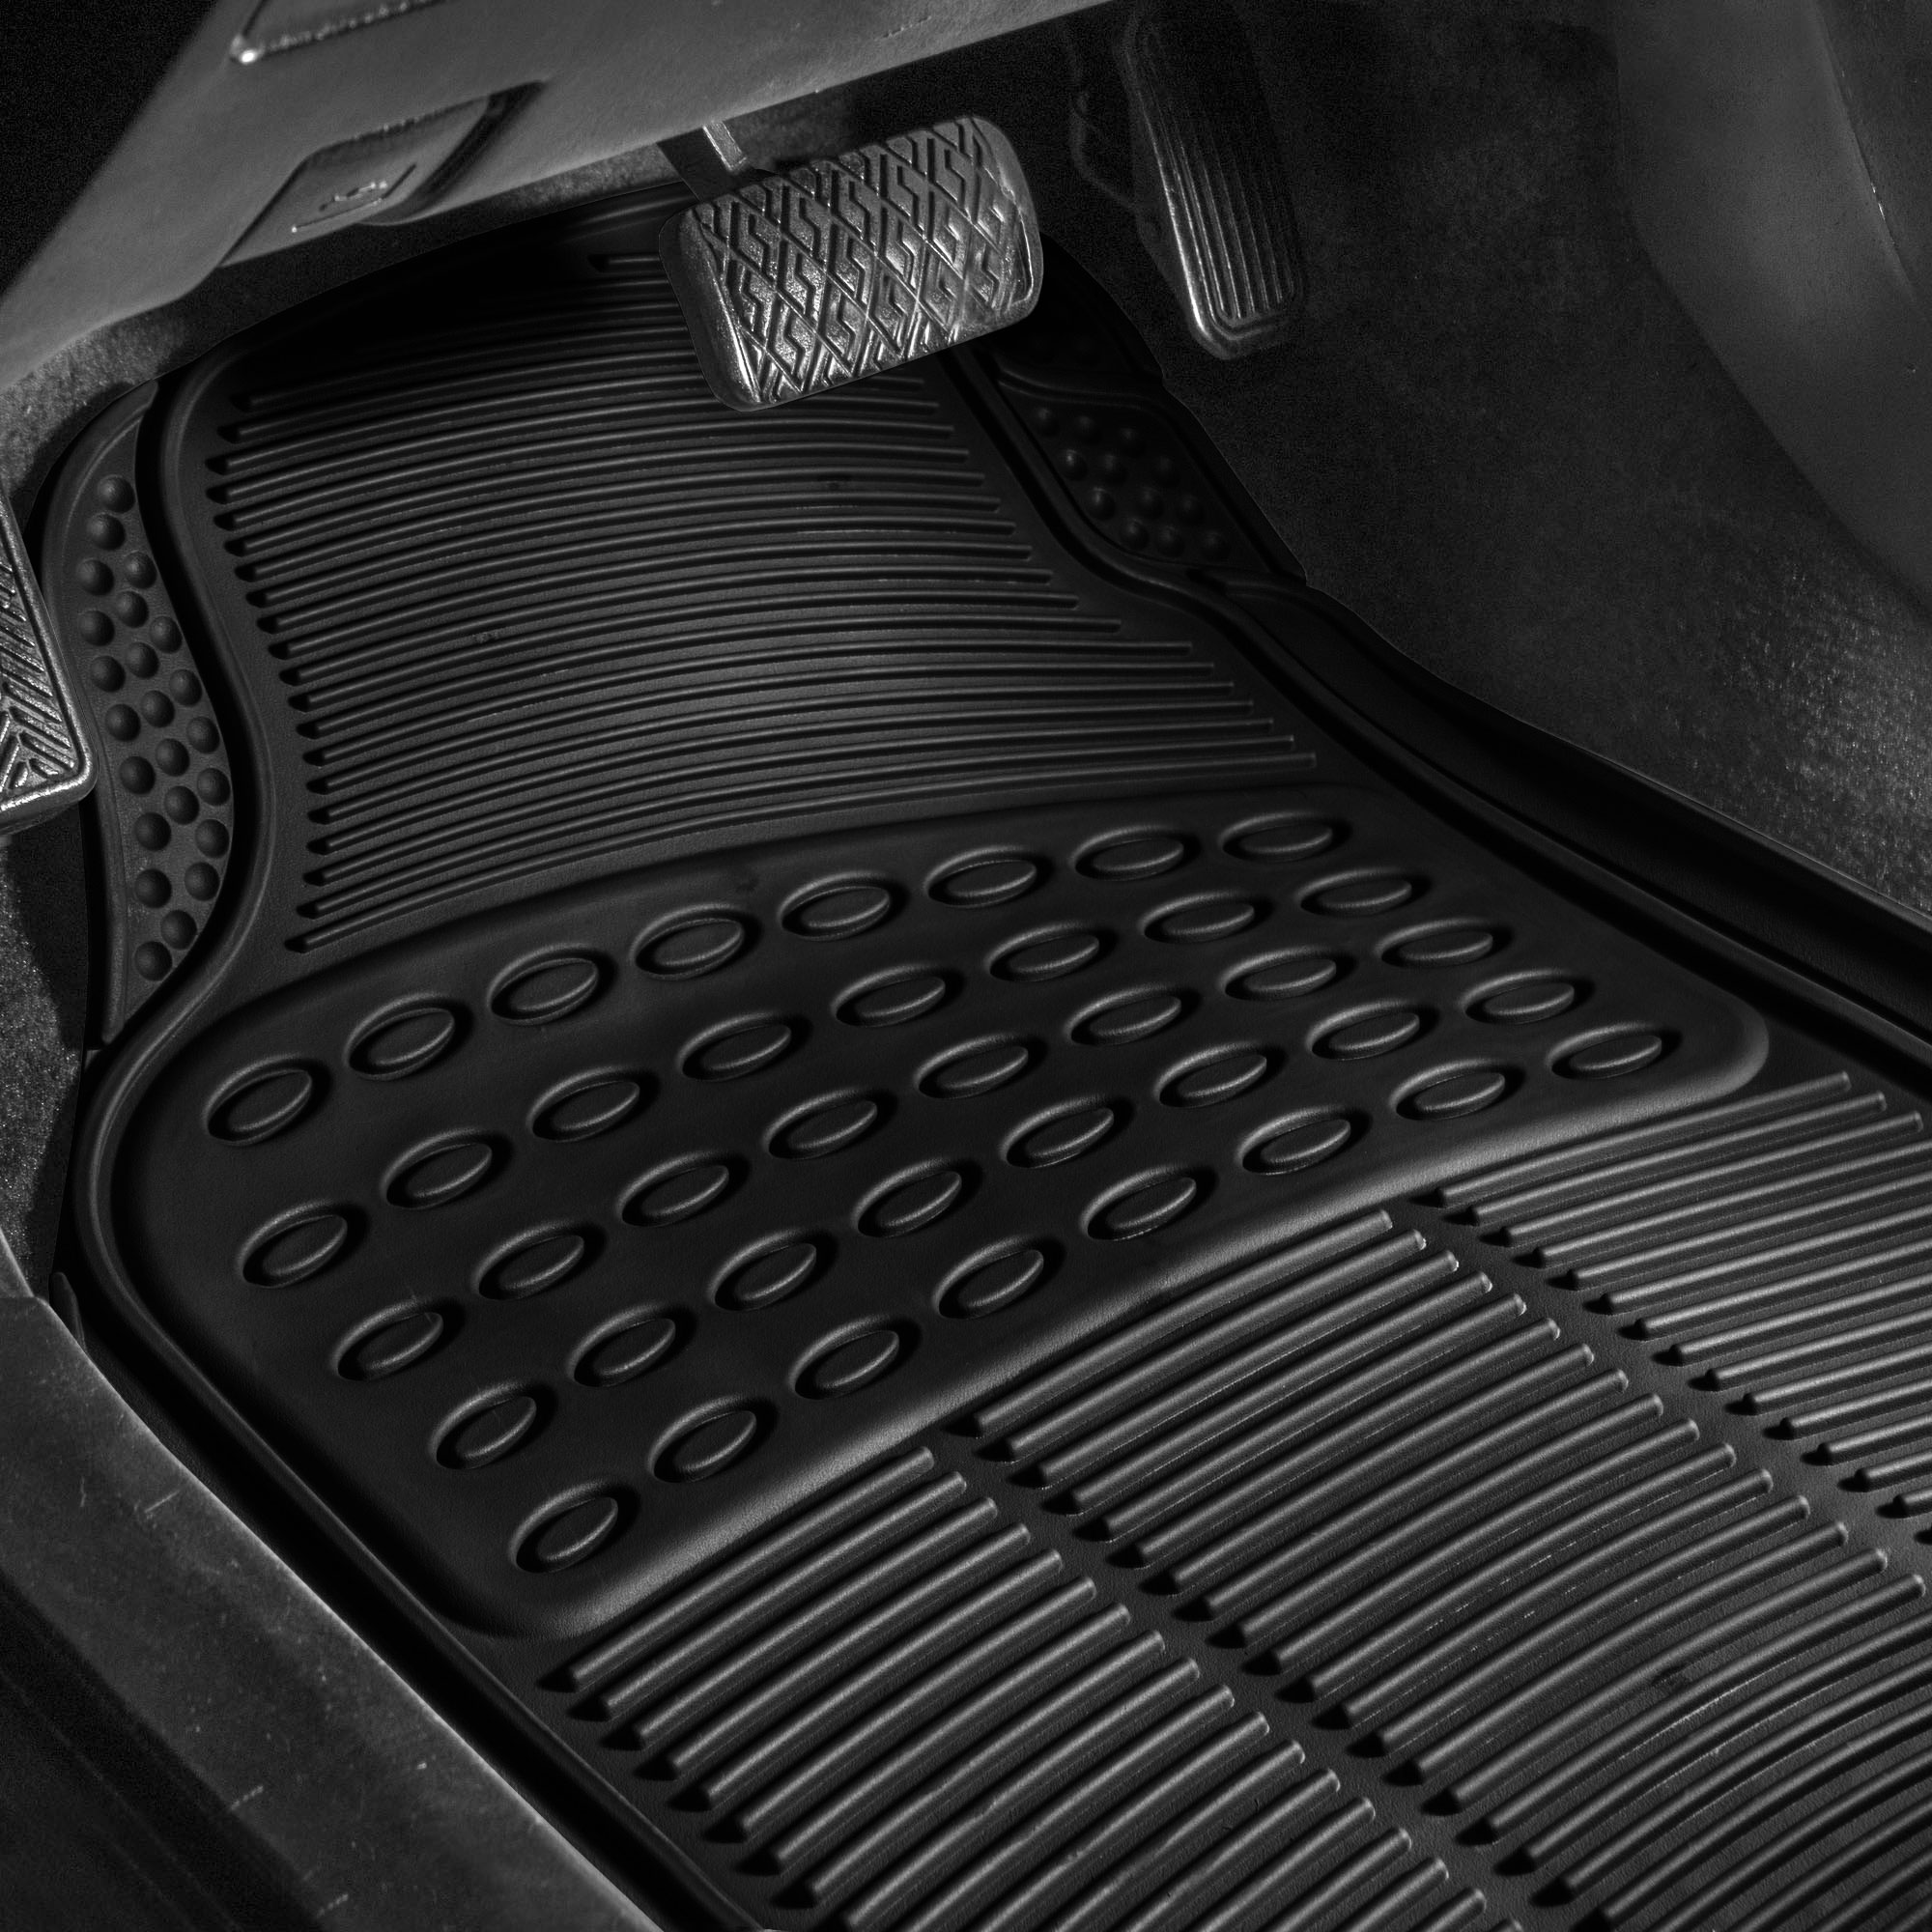 FH Group Universal Fit Rubber Floor Mats for Cars, Trimmable Mats for Most SUV Truck Full Set Black F11305BLACK - image 3 of 7